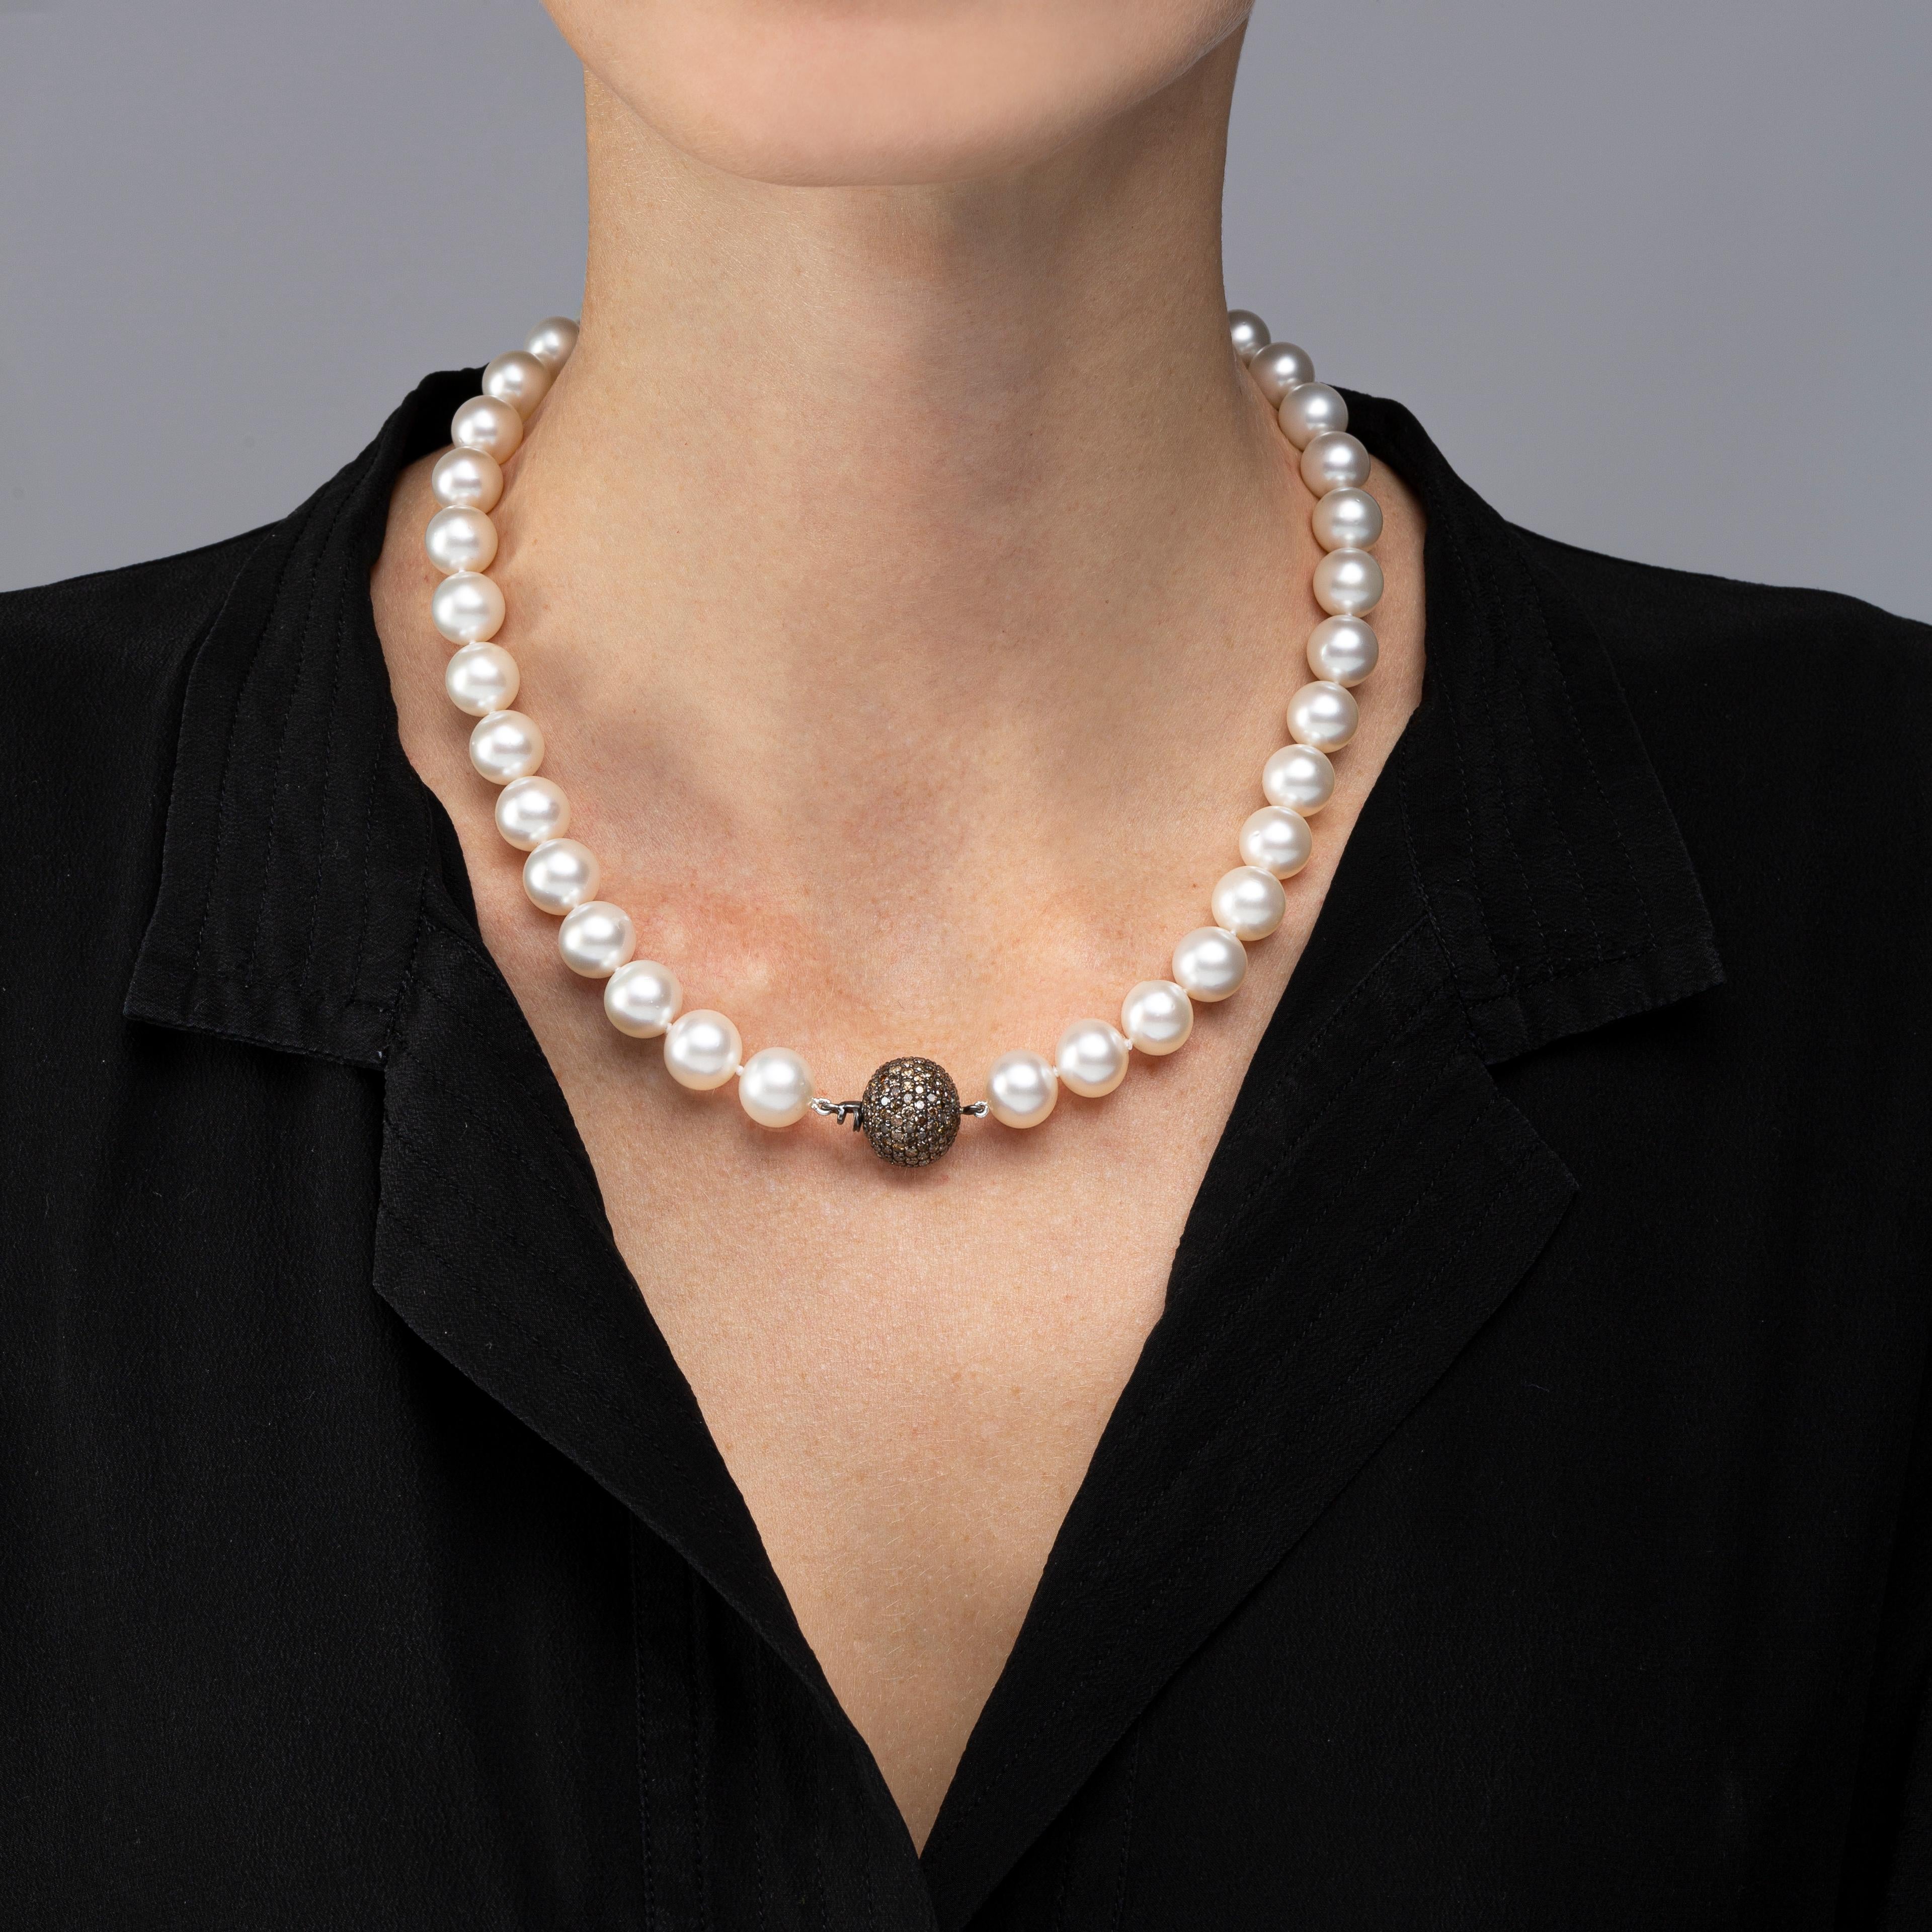 Alex Jona South Sea pearl necklace ( total length 18.5 inch/47 cm), composed of 39 cultured South Sea pearls ranging from  10.2 to 12.7 mm in diameter, strung on a hand-knotted silk cord and secured by a brown diamond pavé ball clasp (212 pieces,